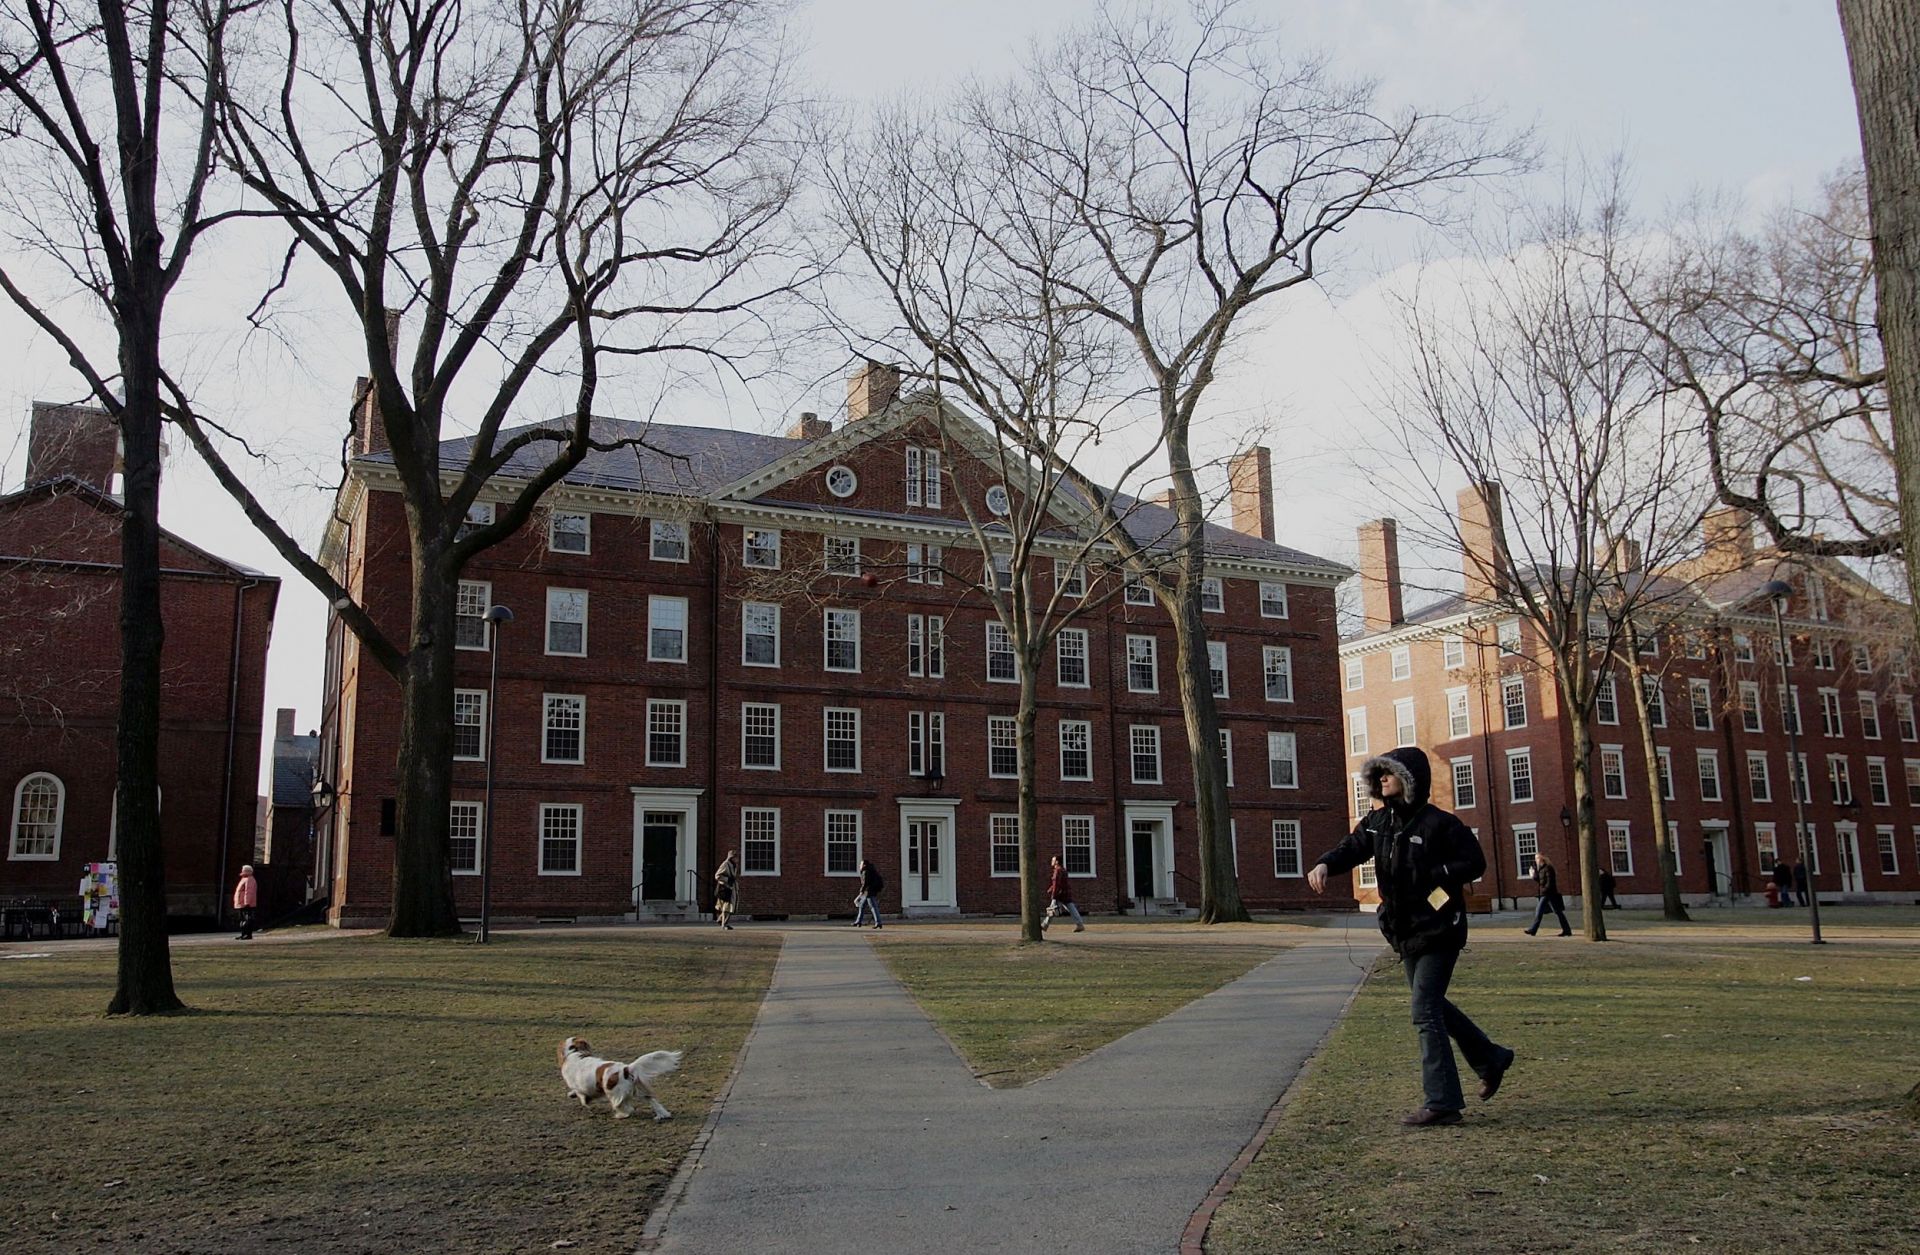 A Harvard education, and the prestige that goes with it, has made the elite U.S. university a favorite of wealthy foreign elites.